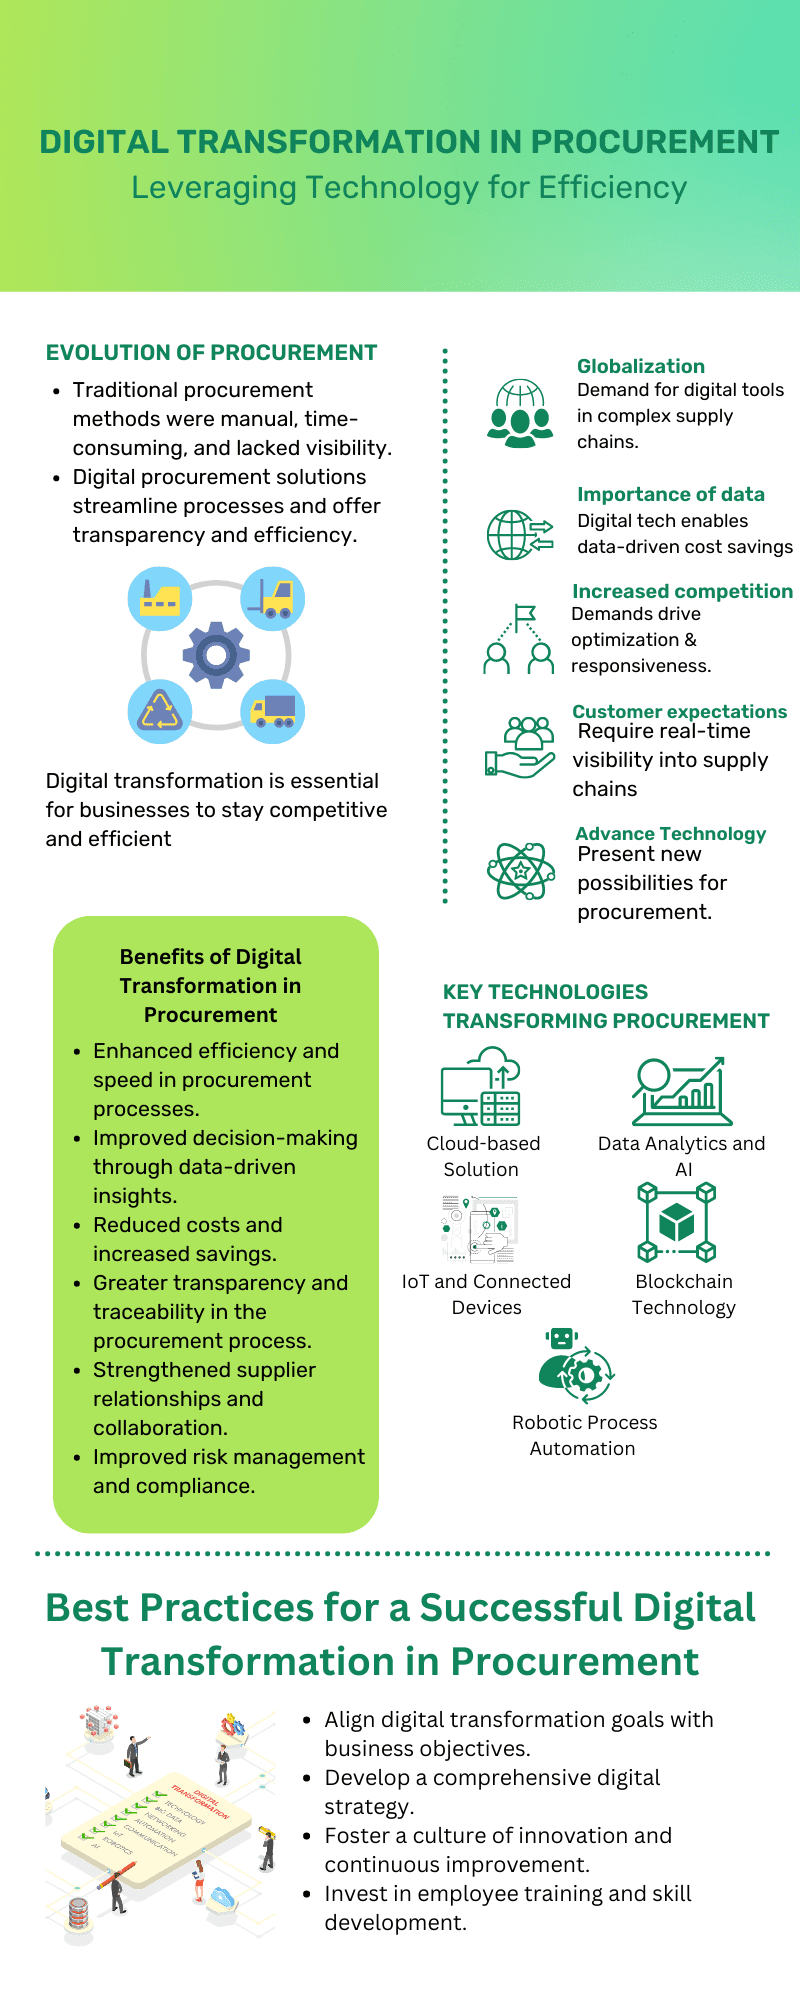 An infographic on 'Digital Transformation in Procurement' discussing its evolution, benefits, the role of globalization, key technologies, and best practices.